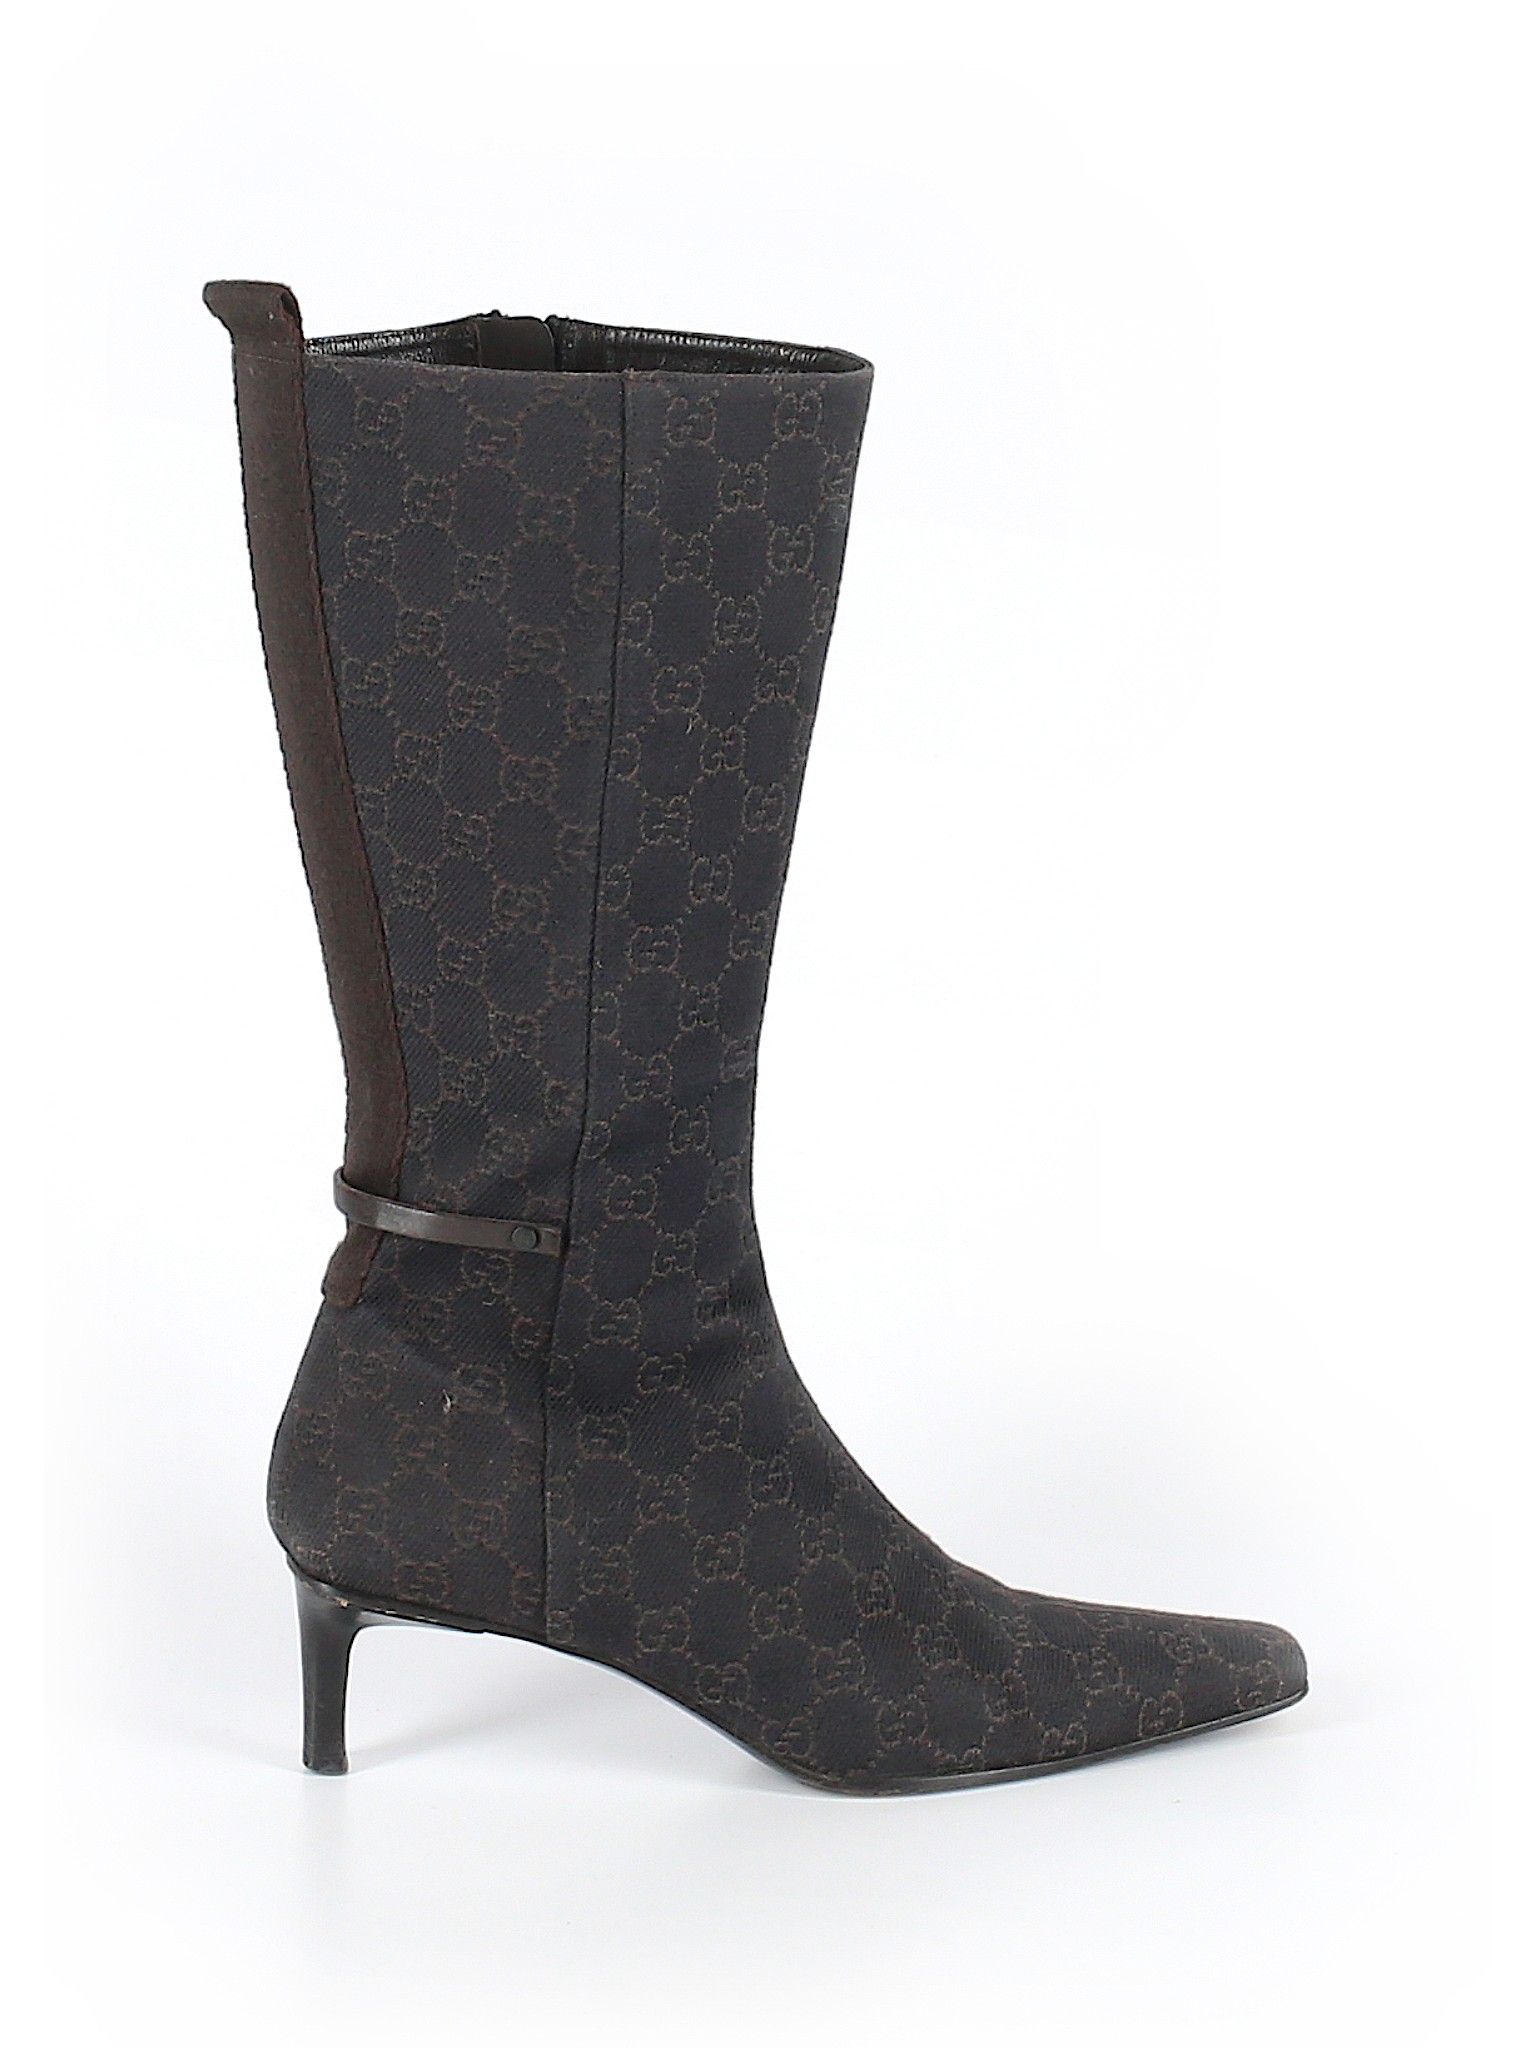 Gucci Boots Size 9: Brown Women's Clothing - 52205910 | thredUP